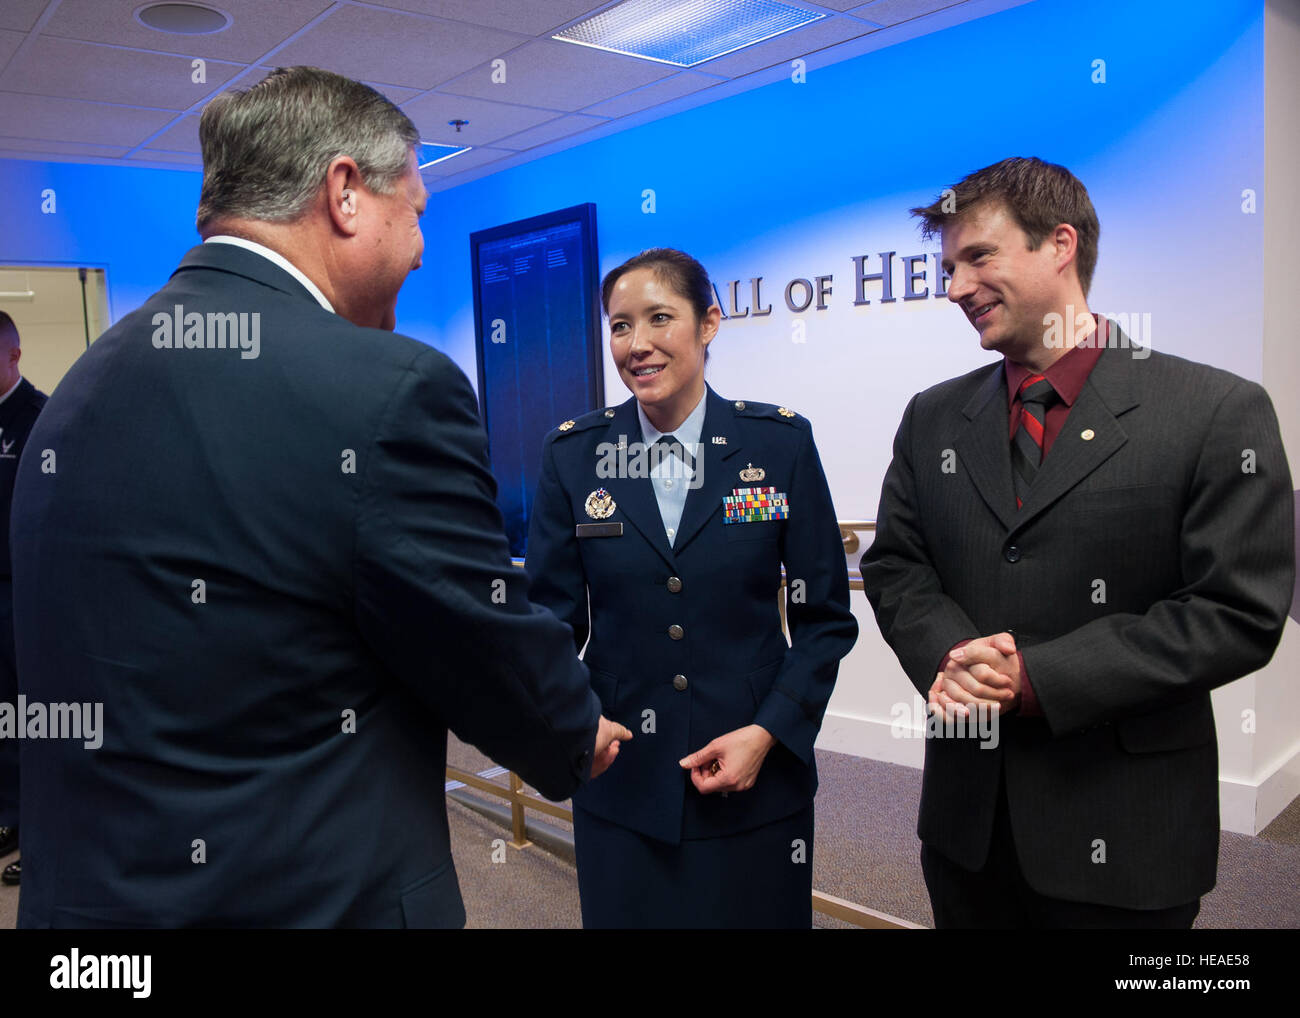 Secretary of the Air Force Michael Donley (left) congratulates Maj. Laura DeJong after she was presented the Lance P. Sijan USAF Leadership Award by Air Force Chief of Staff Gen. Norton Schwartz during a ceremony in the Pentagon's Hall of Heroes, April 6, 2012, Washington, D.C. The Sijan Award was created in 1981 to recognize individuals who demonstrate the highest qualities of leadership both in and out of uniform. Sijan, was an Air Force Academy graduate. At the time of his death, he was an Air Force captain and fighter pilot. He was shot down during a mission in Vietnam and later died while Stock Photo